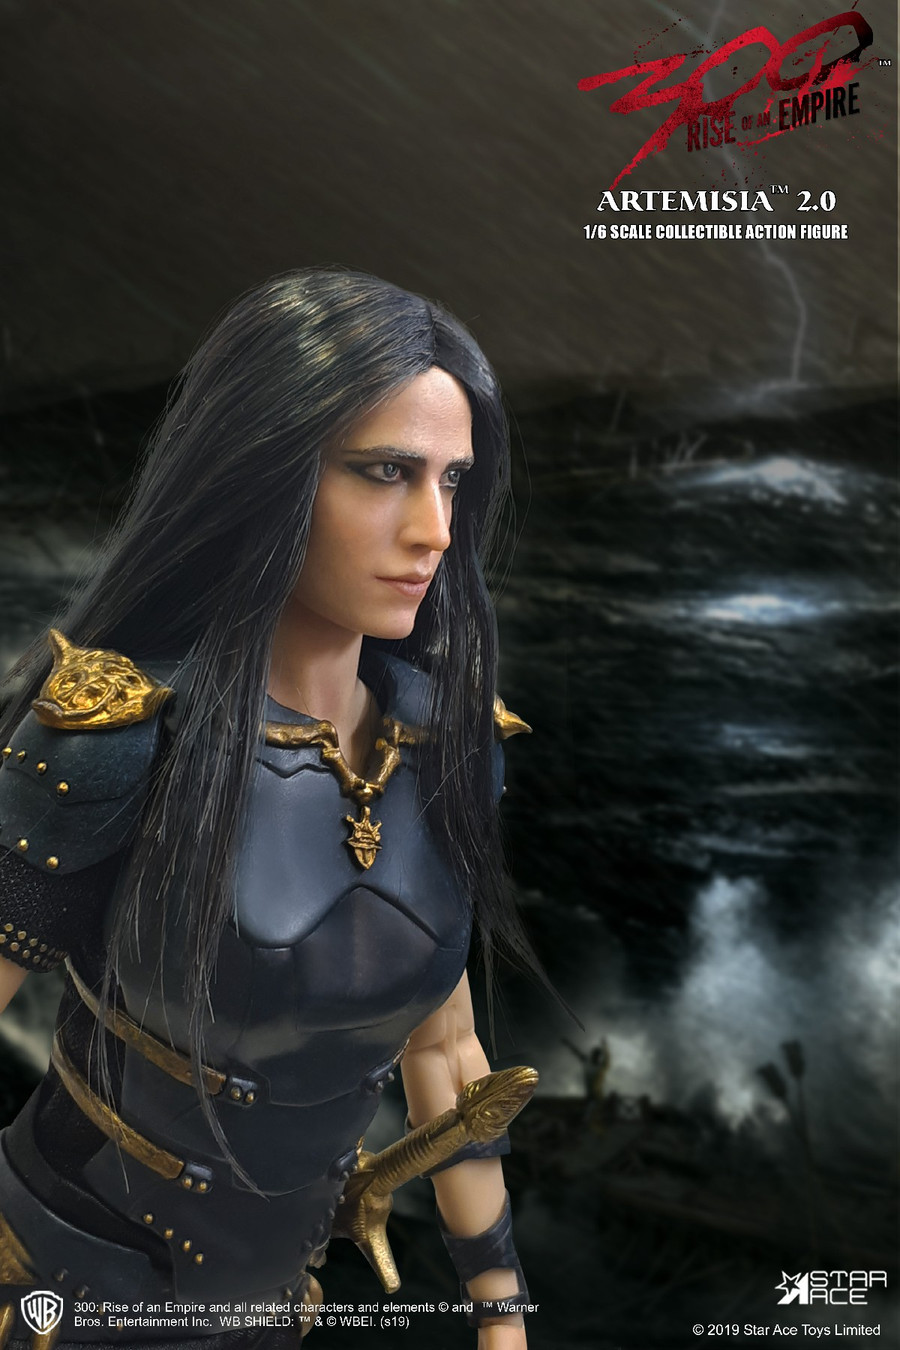 Star Ace - 300: Rise of an Empire - Artemisia 2.0